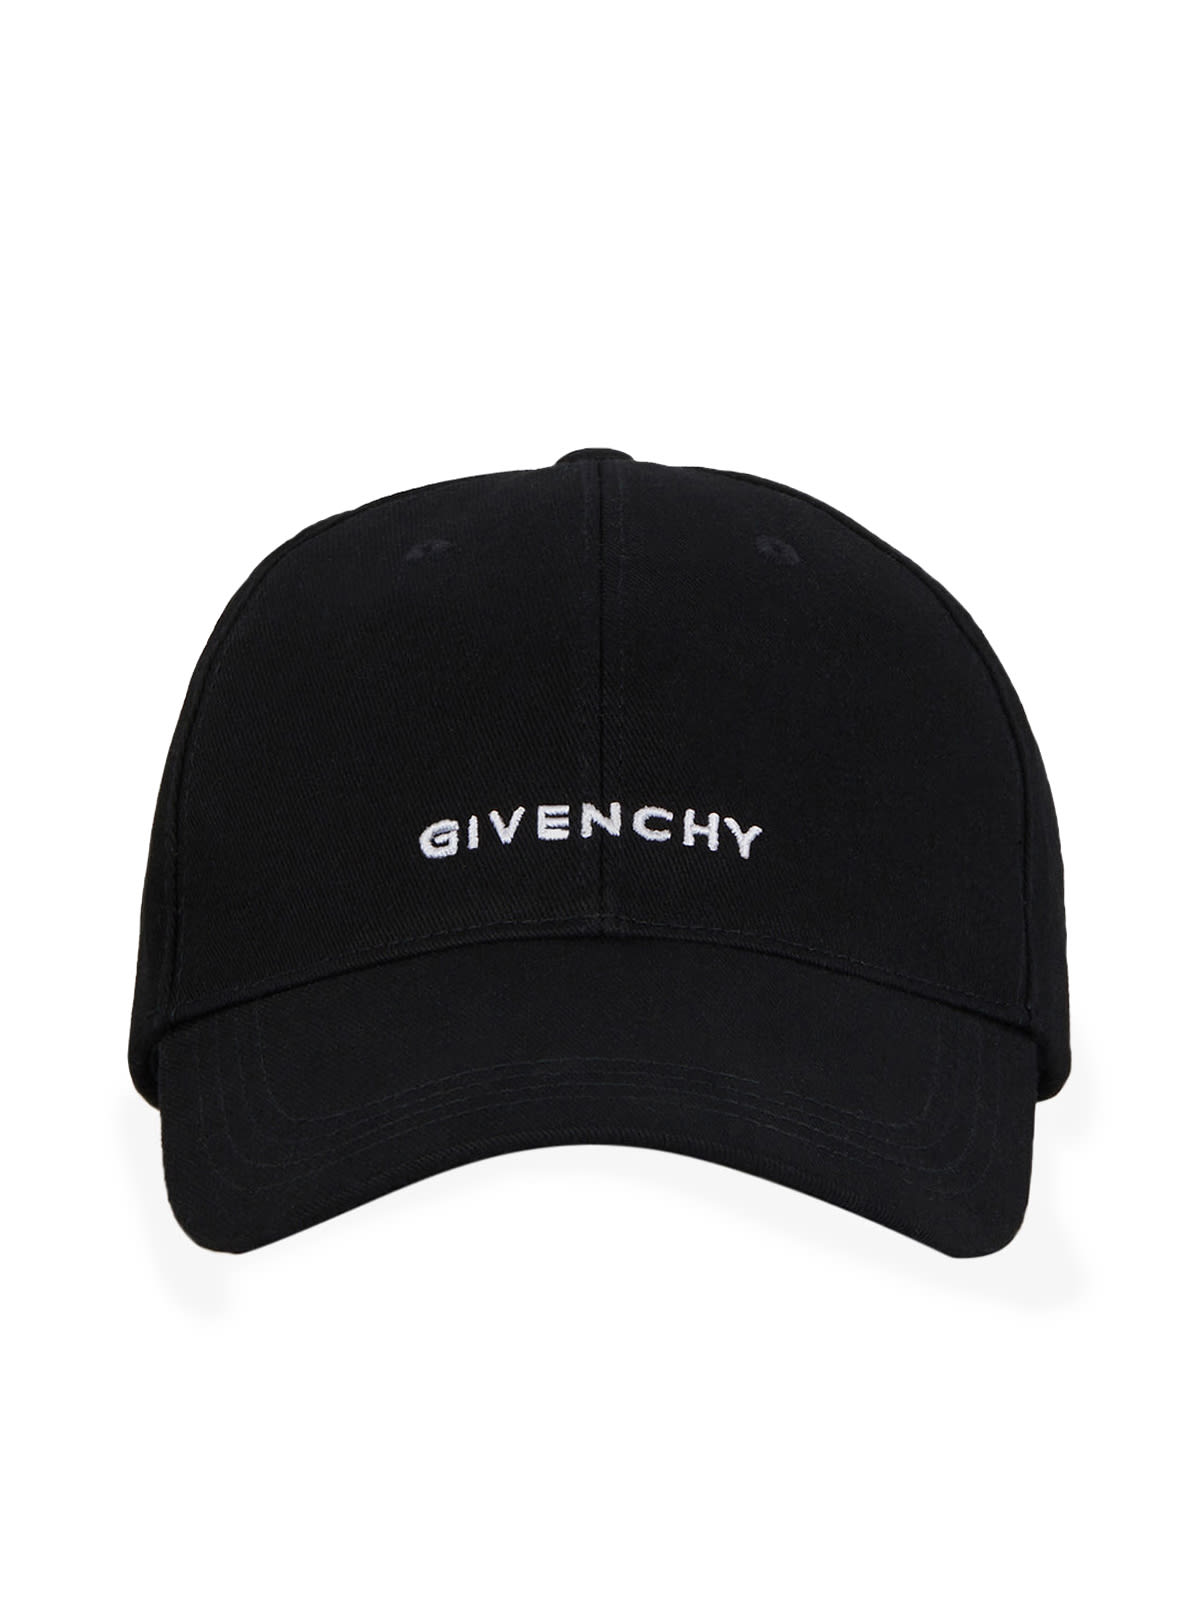 Givenchy Curved Cap W/ Logo